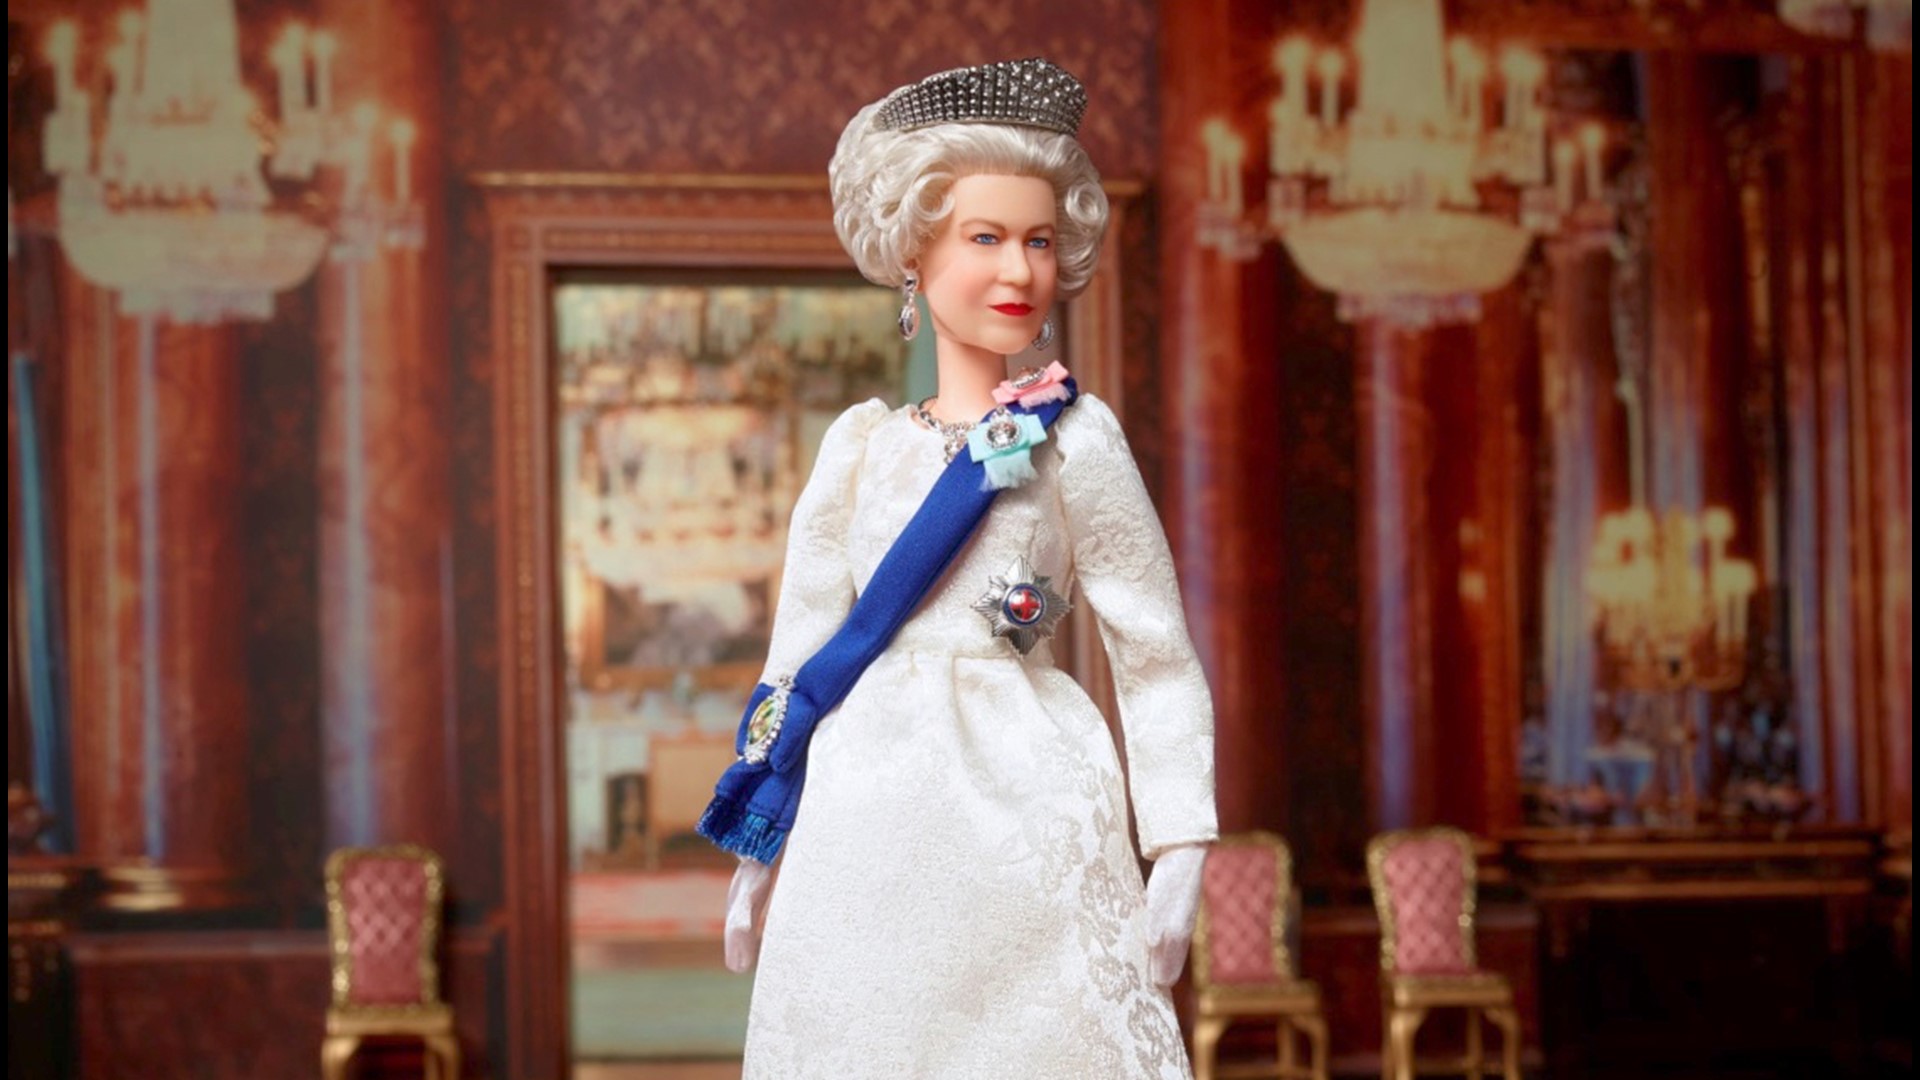 In honor of her 96th birthday and Platinum Jubilee, celebrating a historic 70 years on the throne, the Monarch has now a collectible Barbie doll. Buzz60's Maria Mercedes Galuppo has the story.